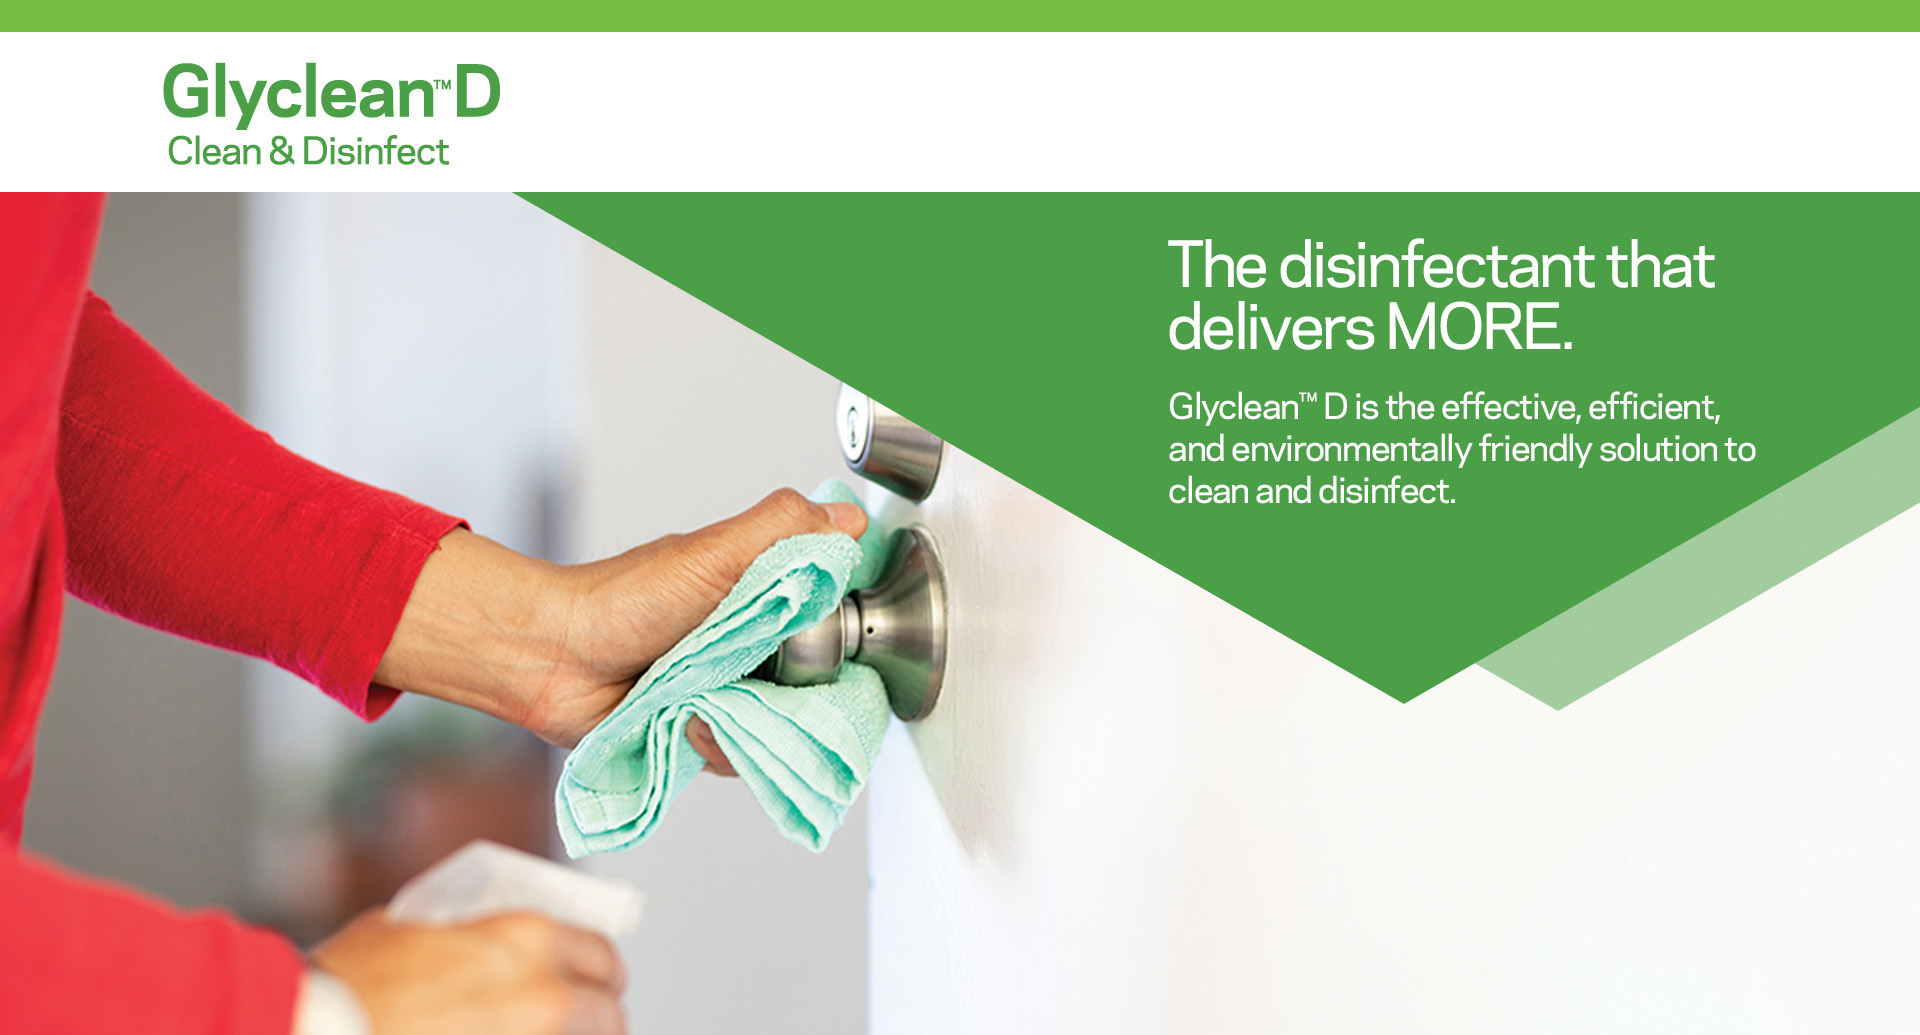 Glyclean™ D, the more effective, efficient, and environmentally friendly solution to clean and disinfect